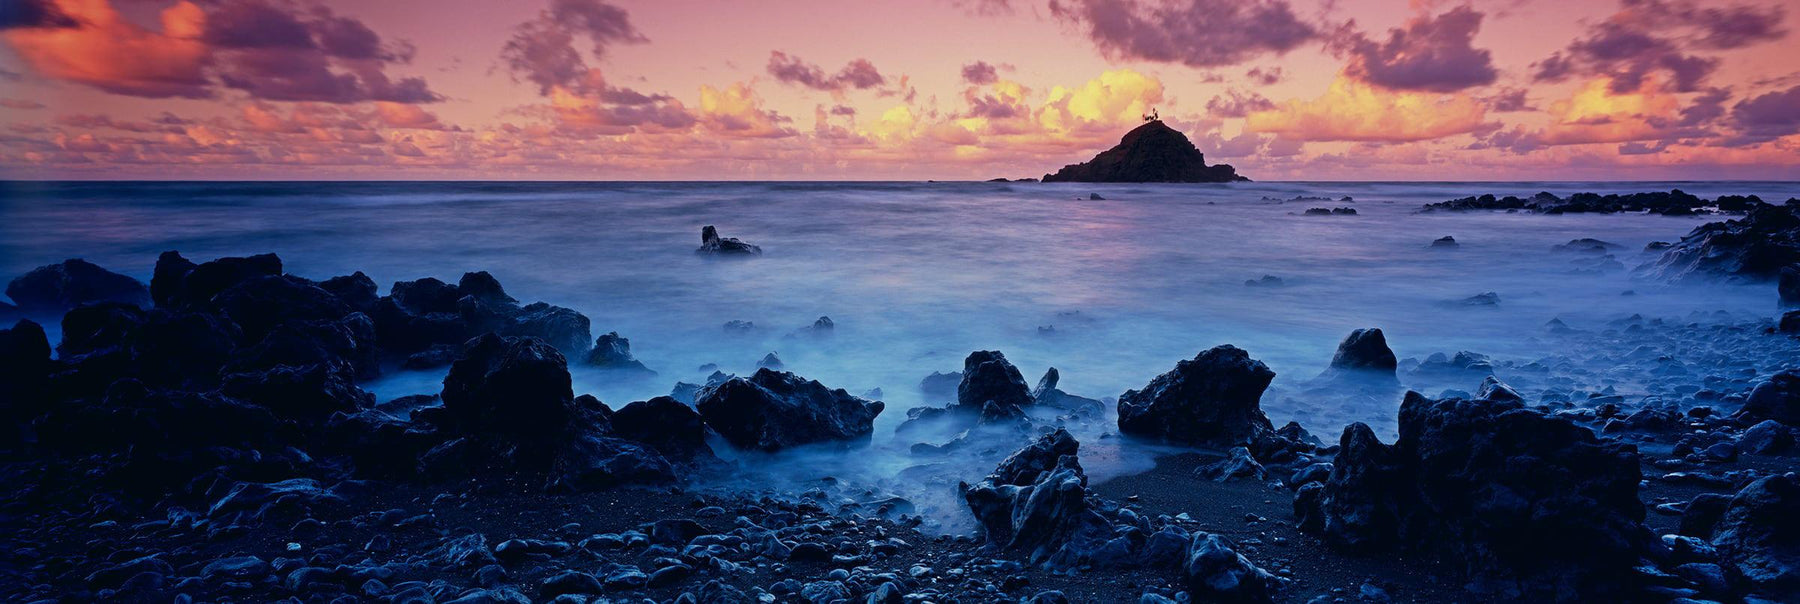 Waves washing onto a rocky Koki Beach with a distant island silhouetted in the background at sunrise